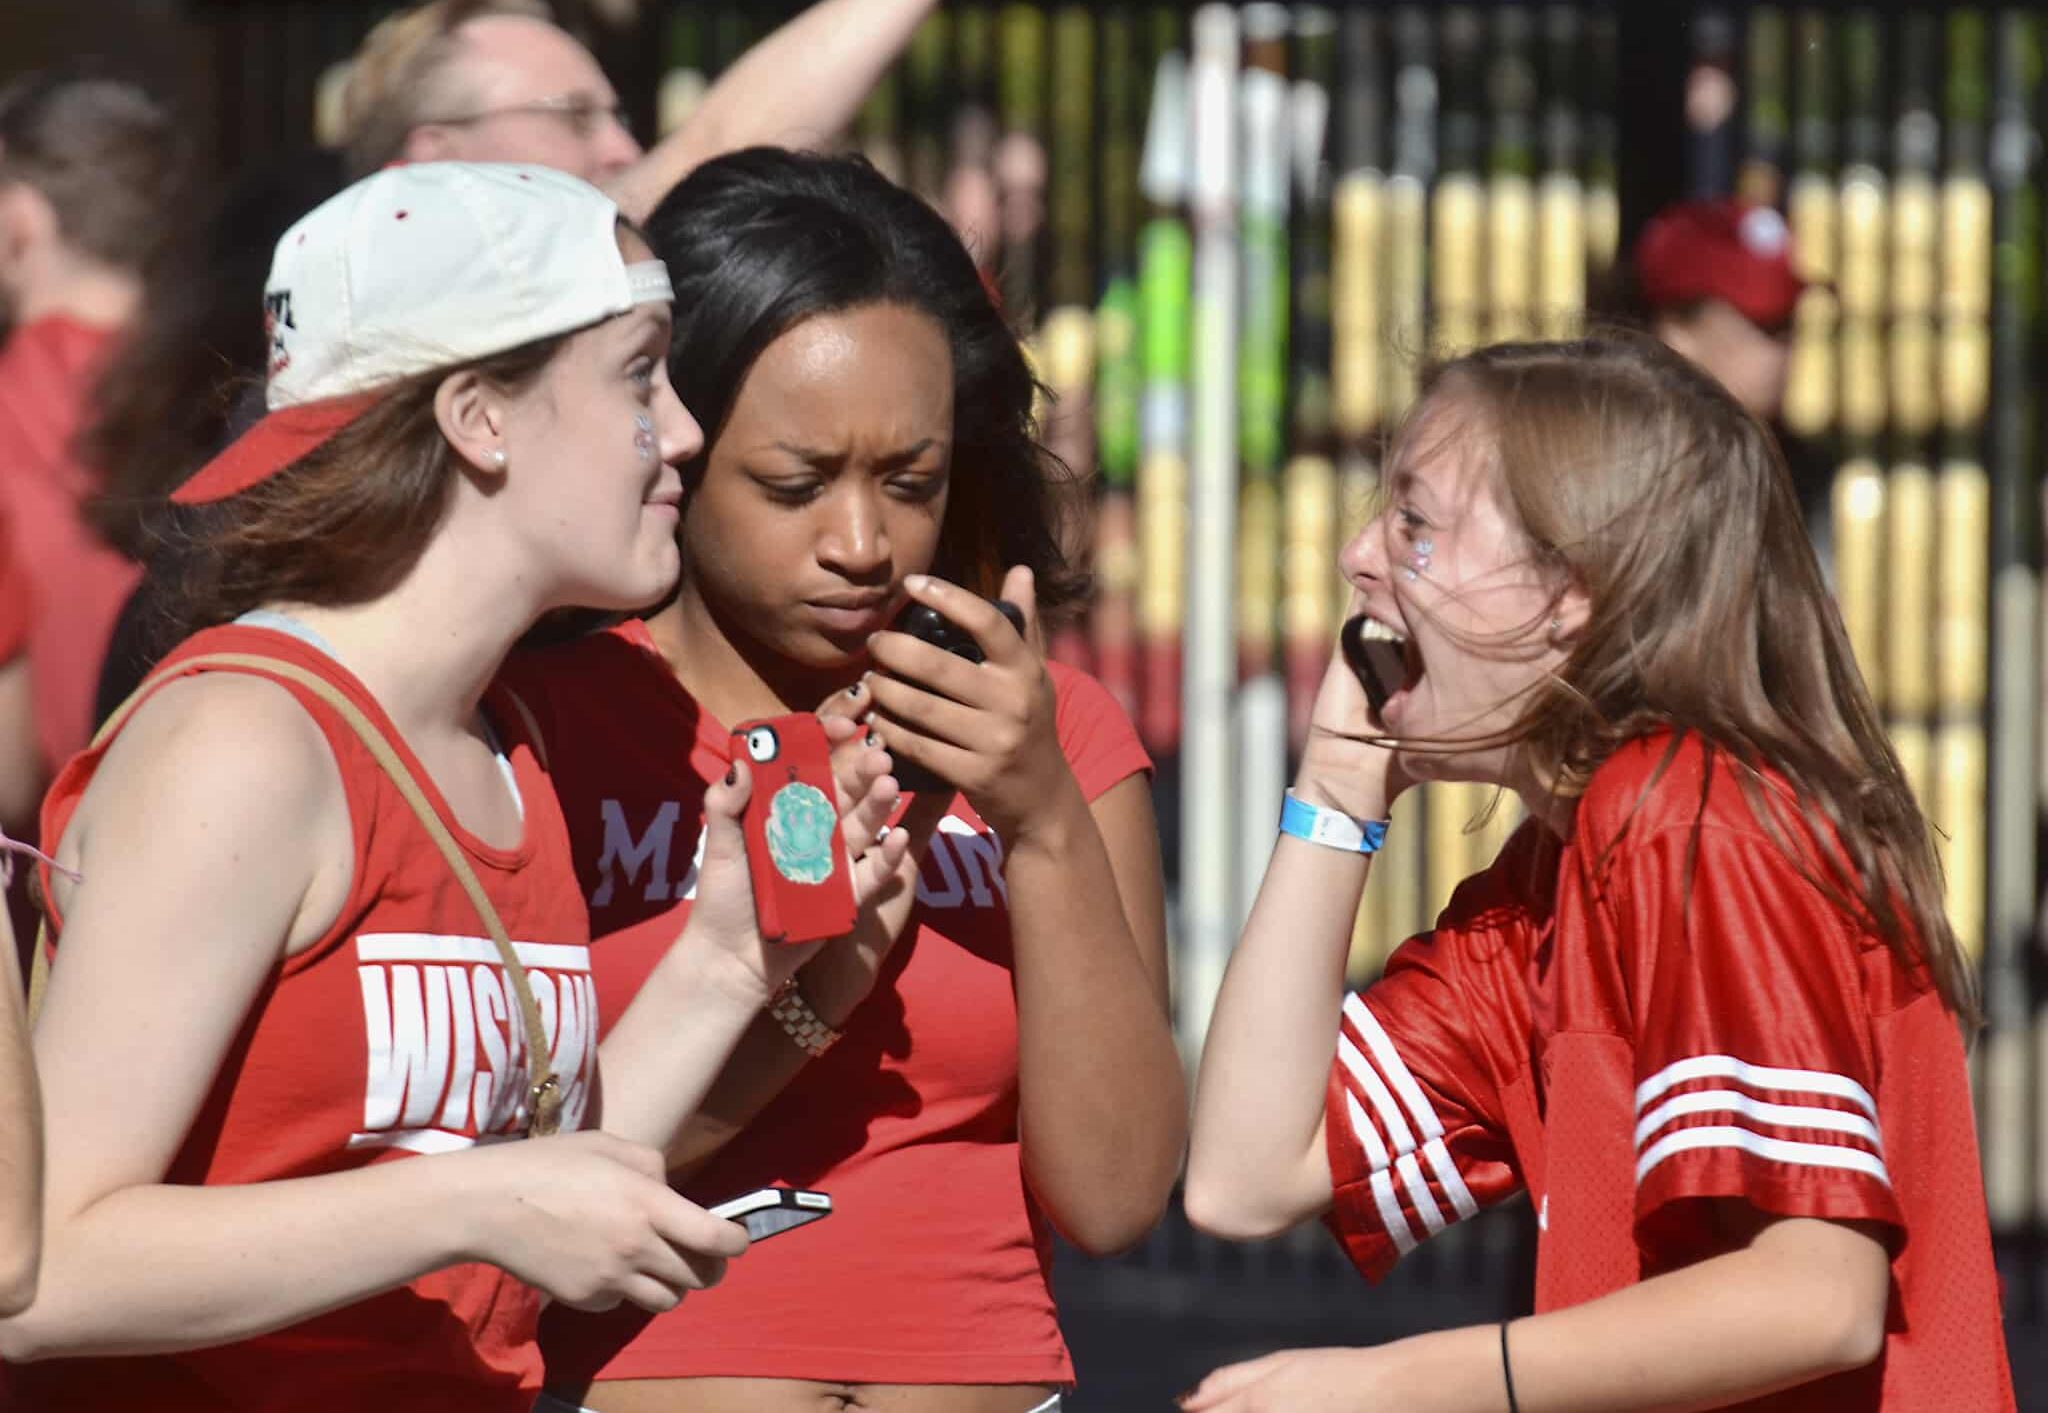 Three young women Wisconsin Badgers fans with phones, October 12, 2013 (Richard Hurd/Flickr/https://creativecommons.org/licenses/by/2.0/)